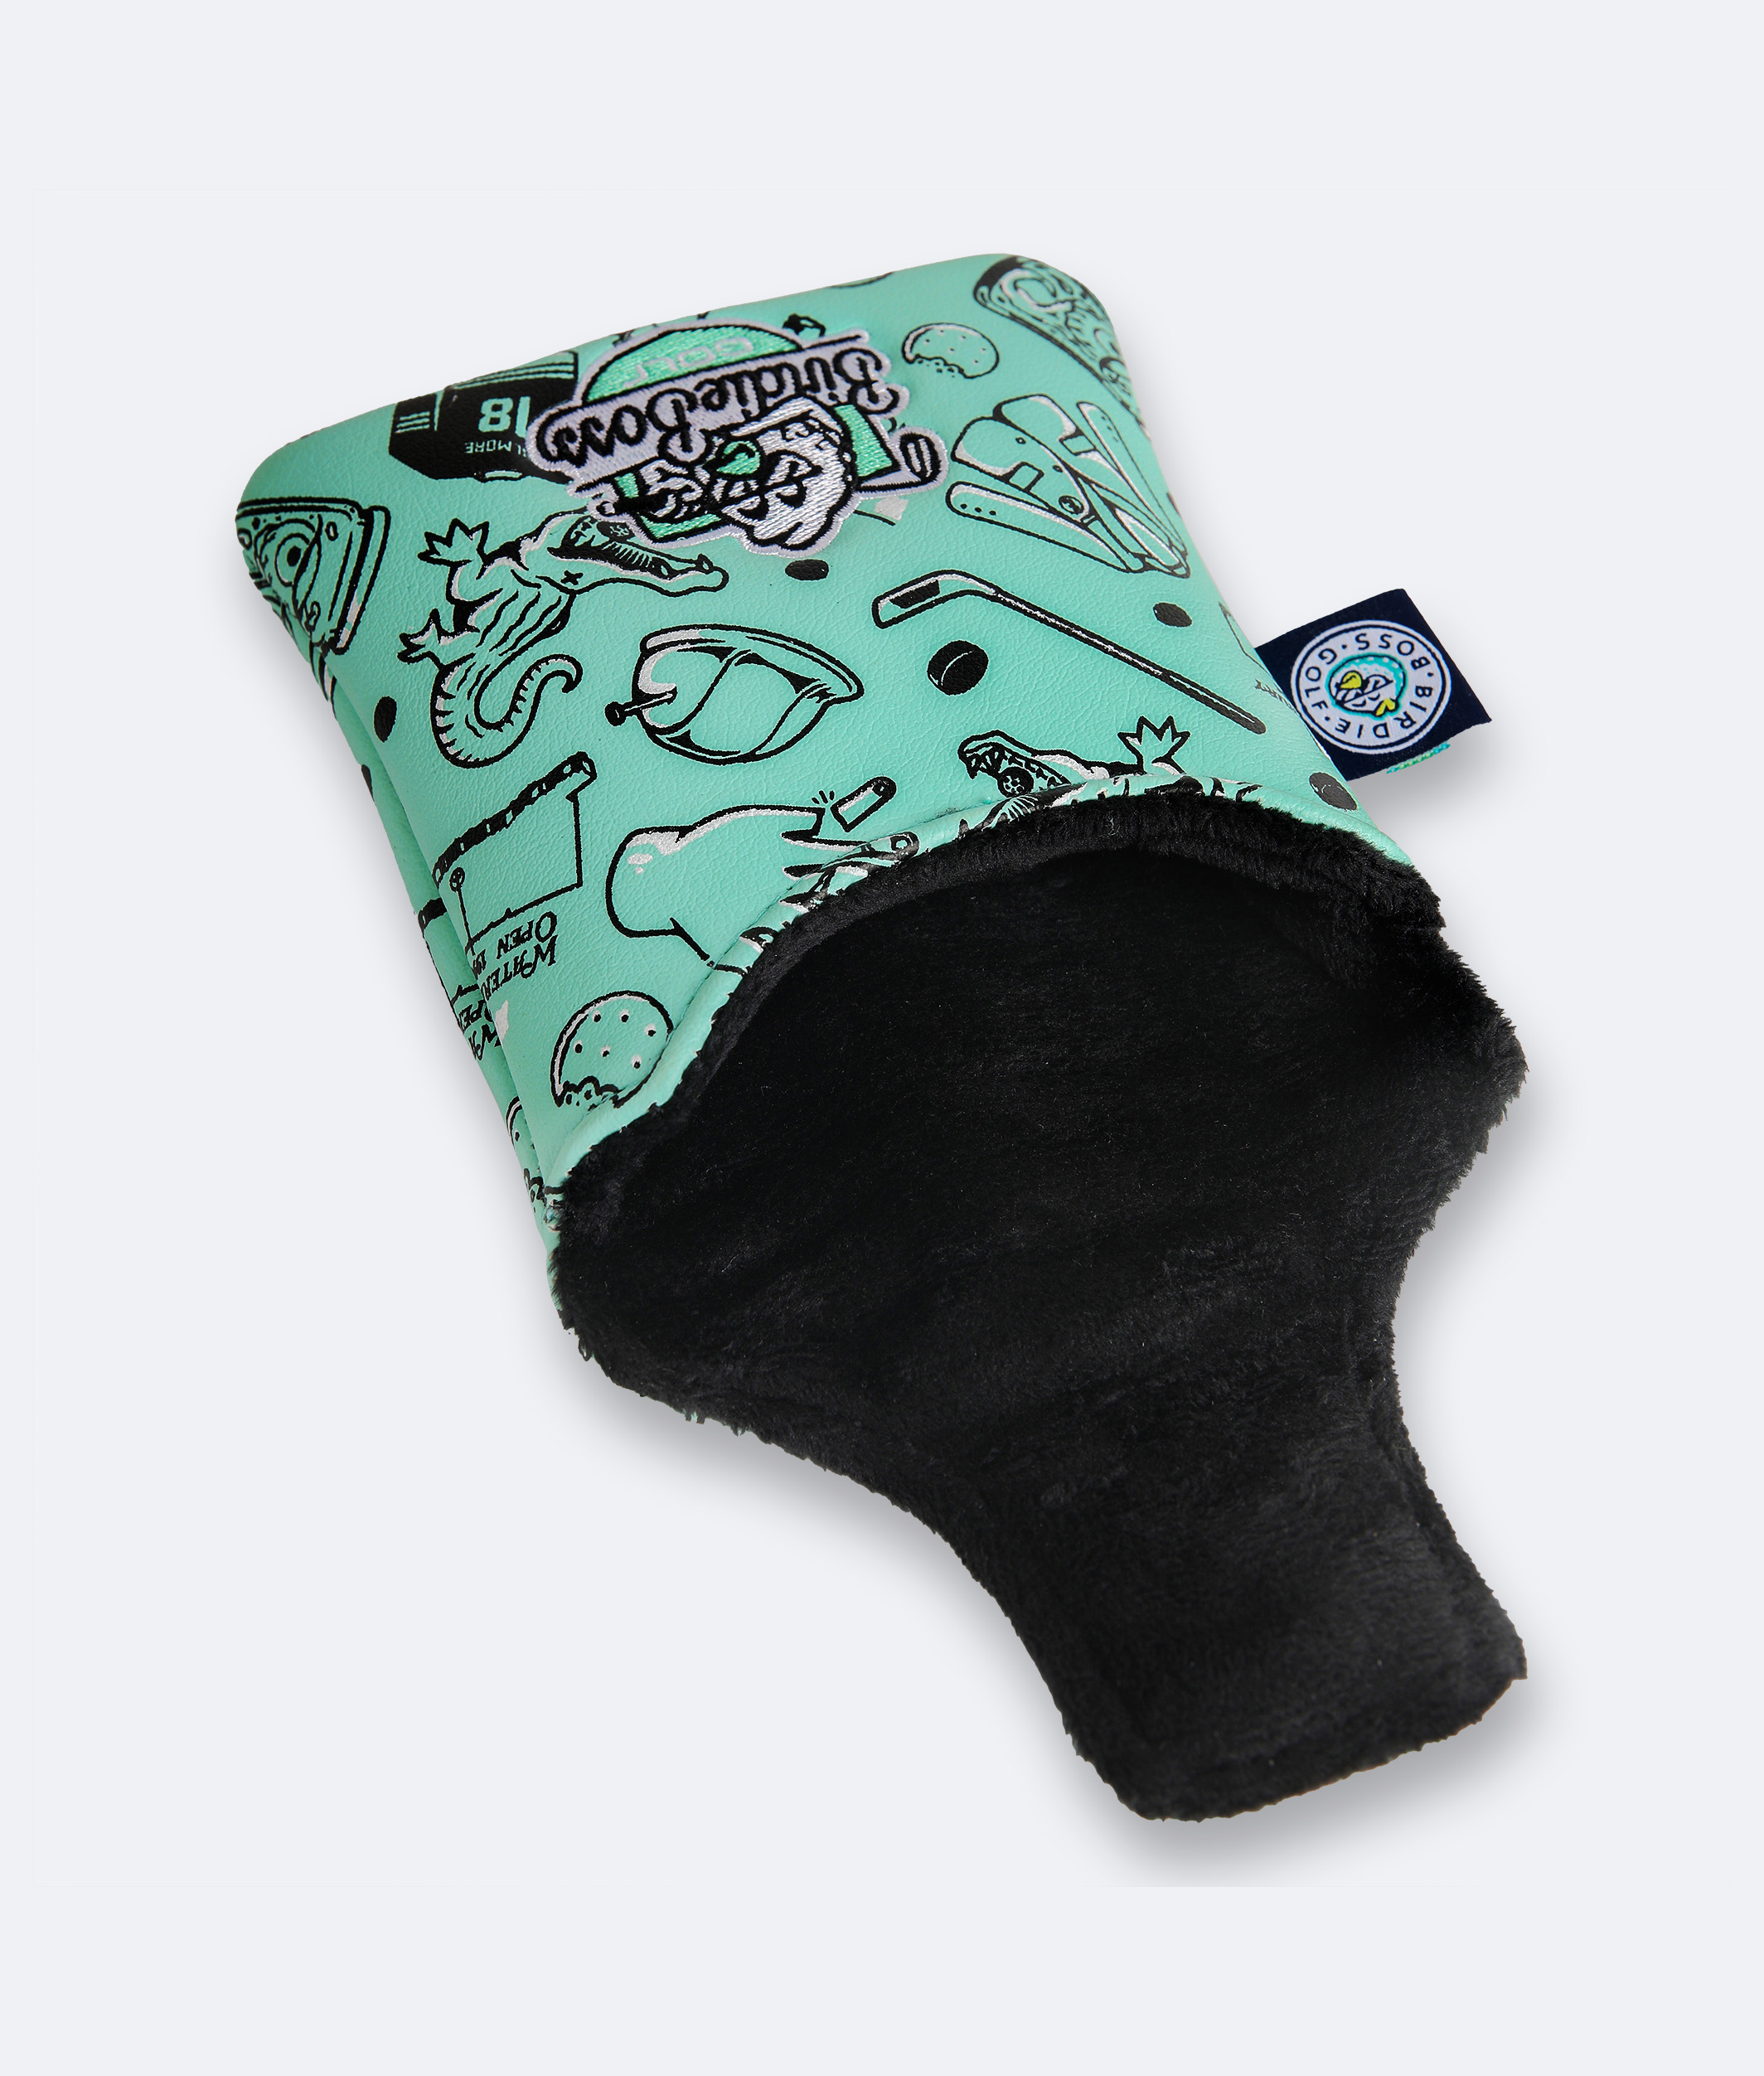 Royal Chubbs Putter Headcover